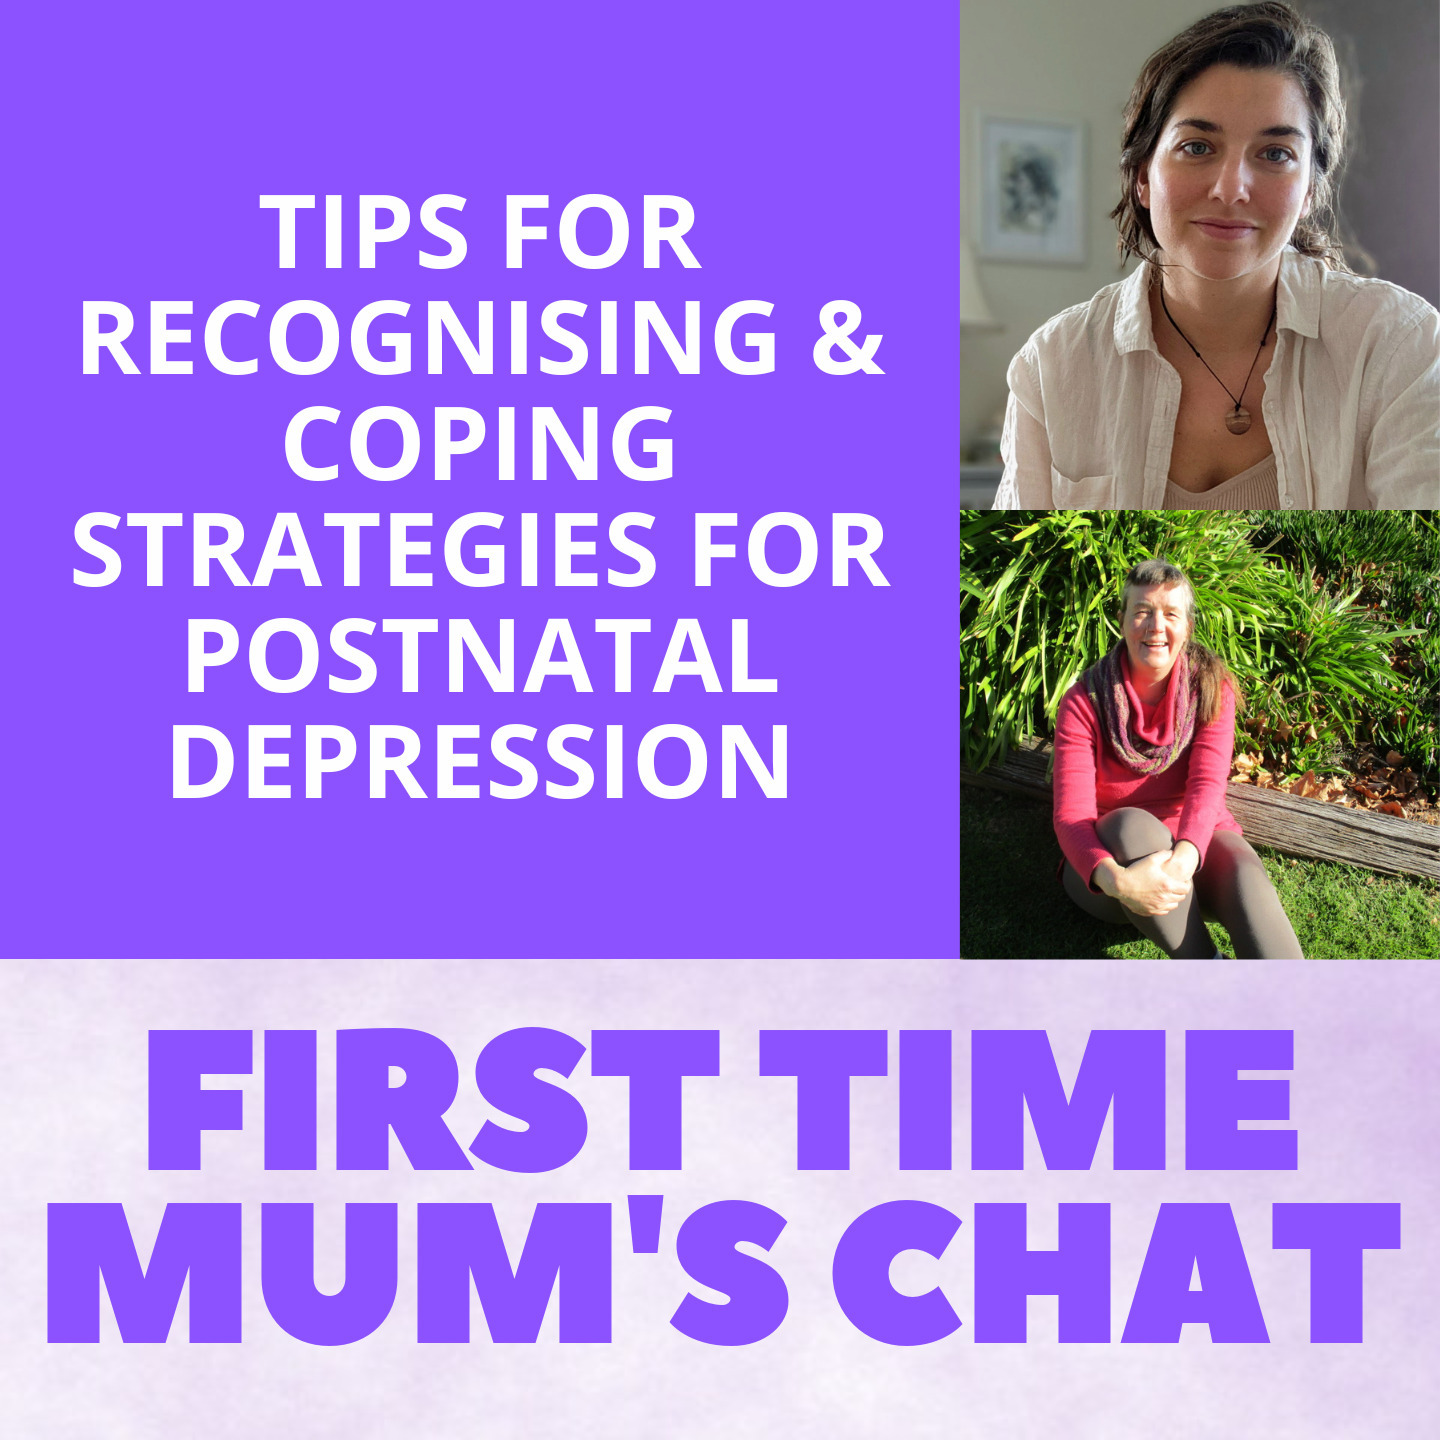 Tips For Recognising and Coping Strategies For Postnatal Depression